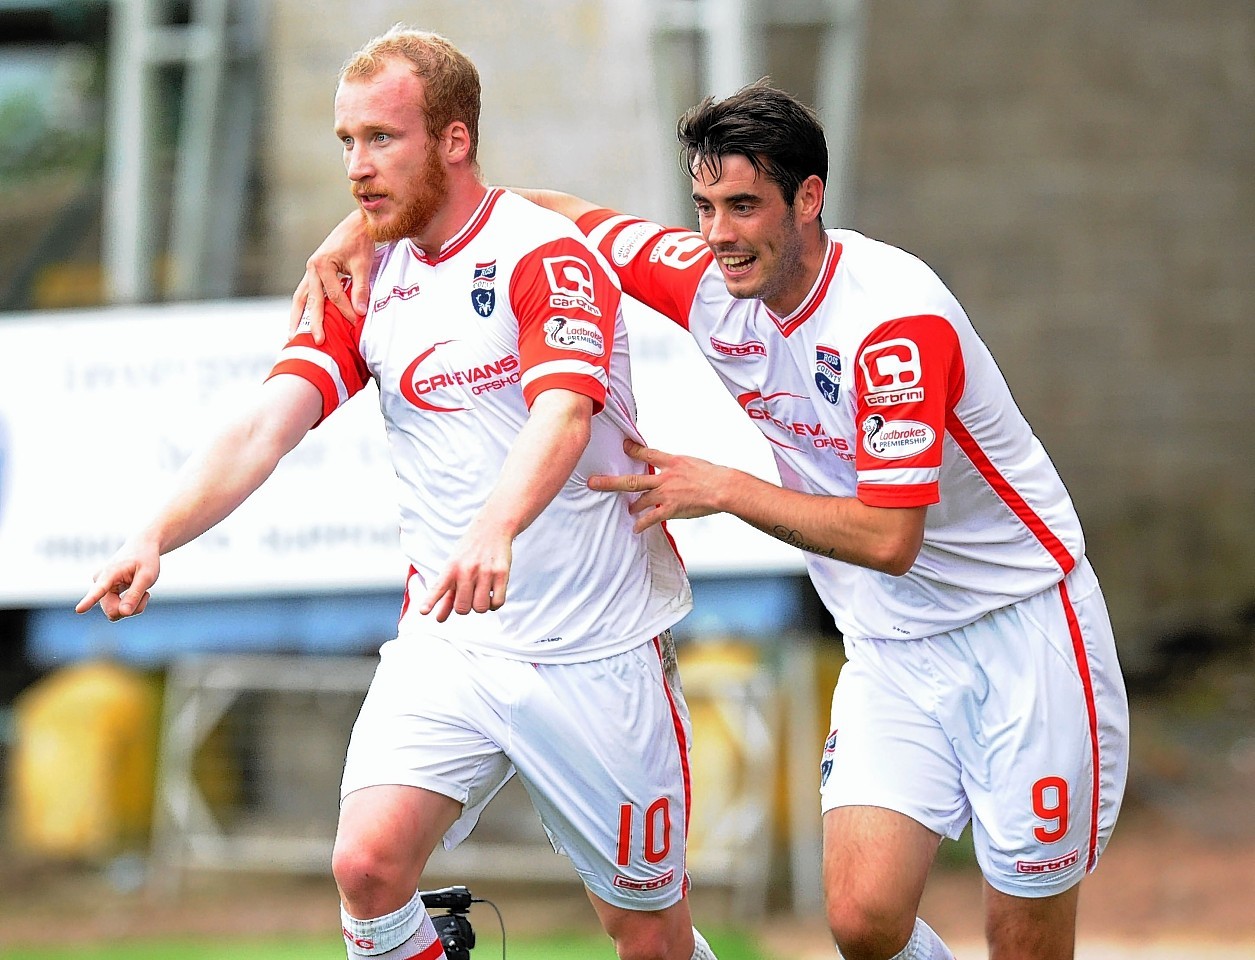 Ross County forwards Liam Boyce and Brian Graham have been in impressive form